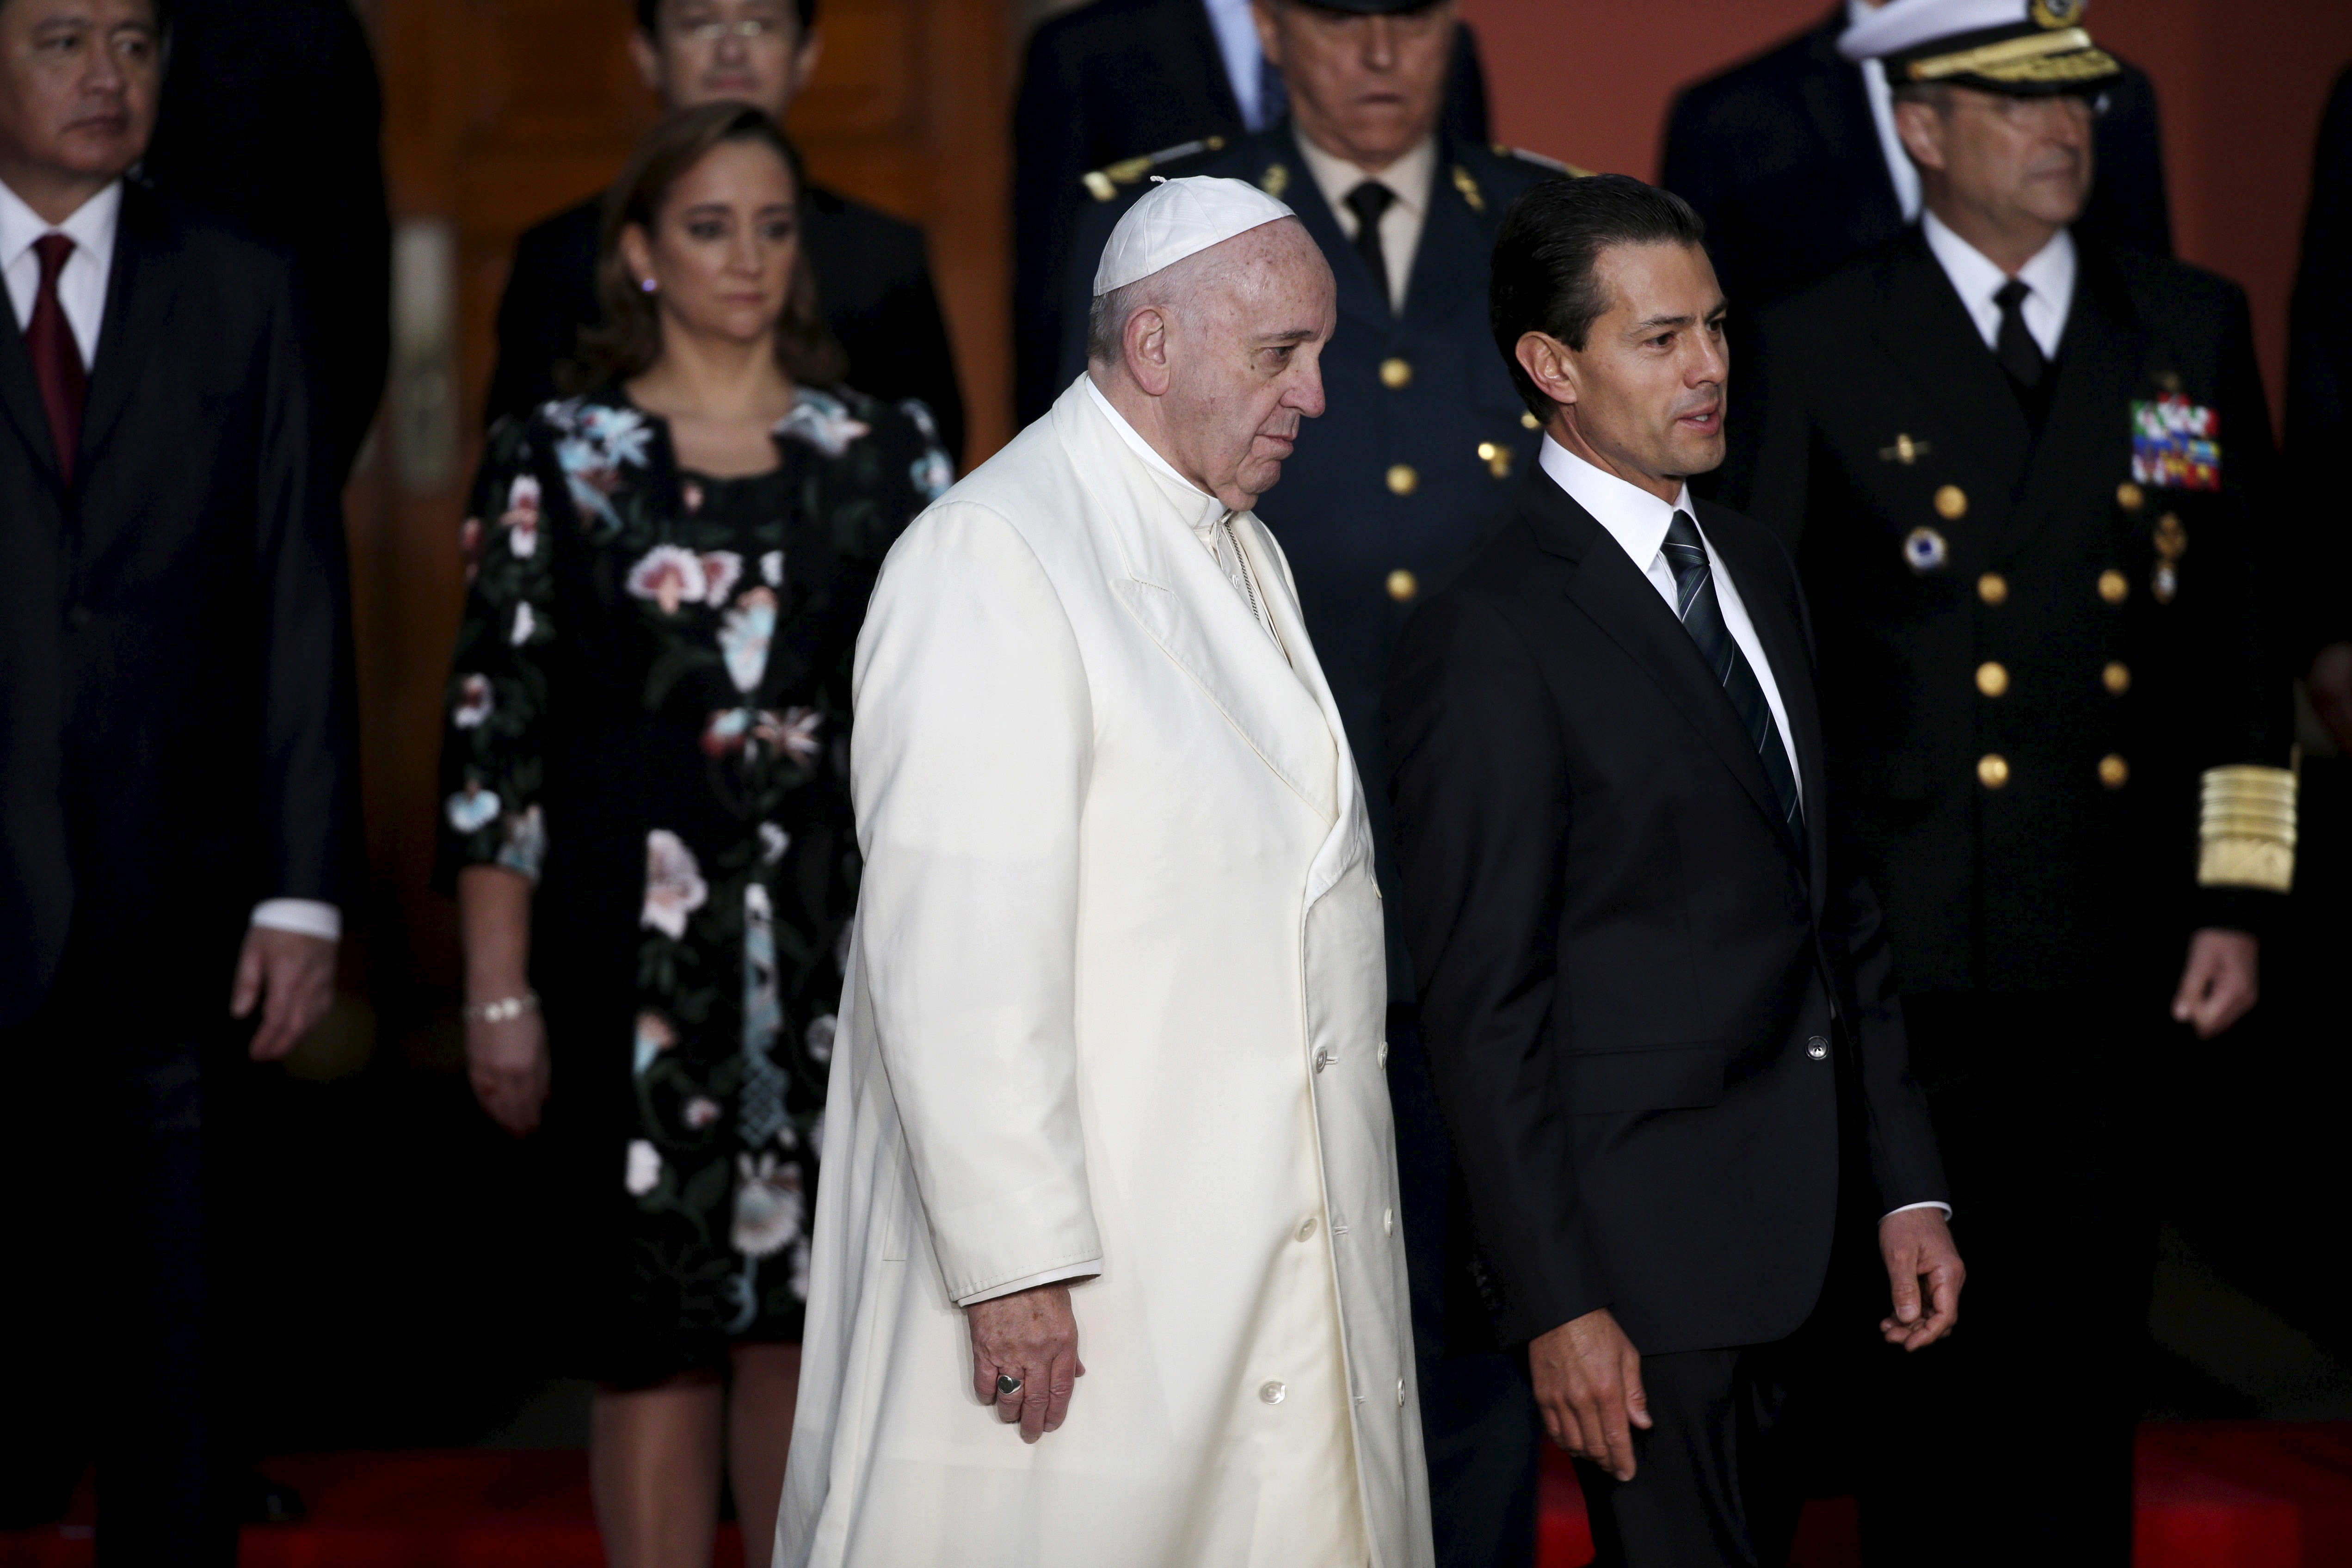 Pope Francis and Mexico's President Enrique Pena Nieto participate in a ceremony at the National Palace in Mexico City, February 13, 2016.  REUTERS/Max Rossi - RTX26RZO